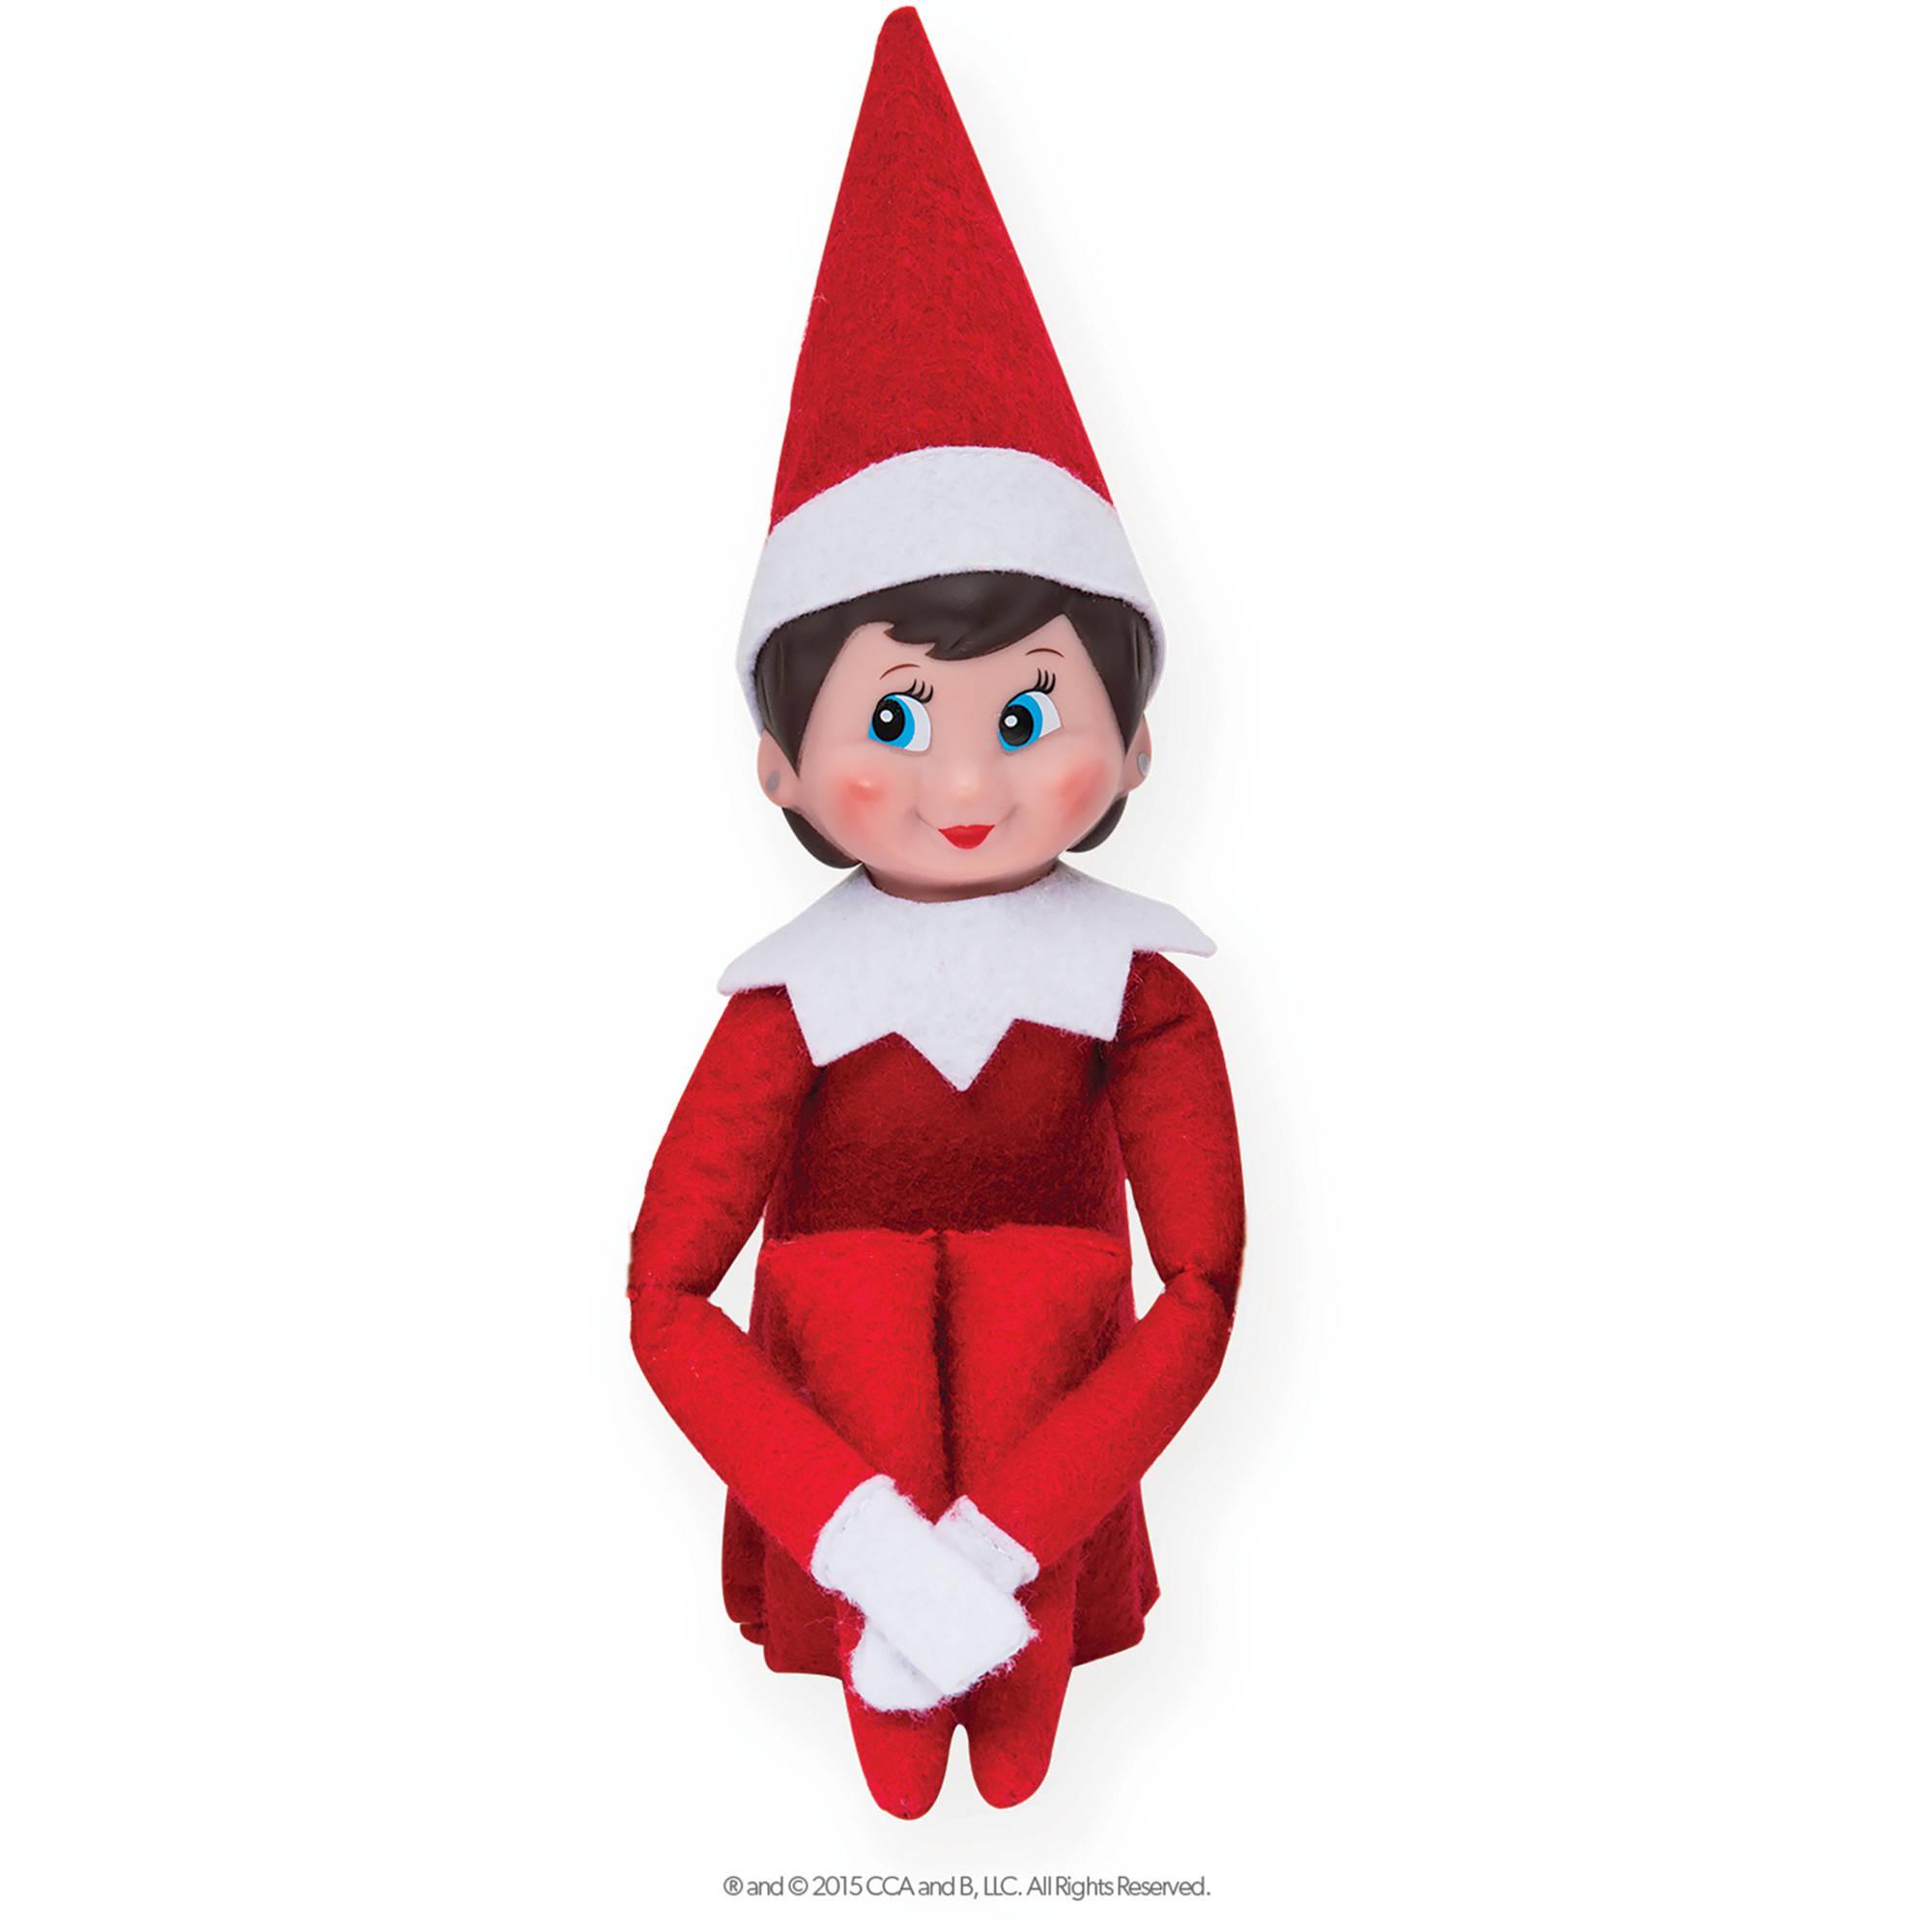 Elf And Doll On Shelf Background Picture Of Santa With Elf On The Shelf  Background Image And Wallpaper for Free Download